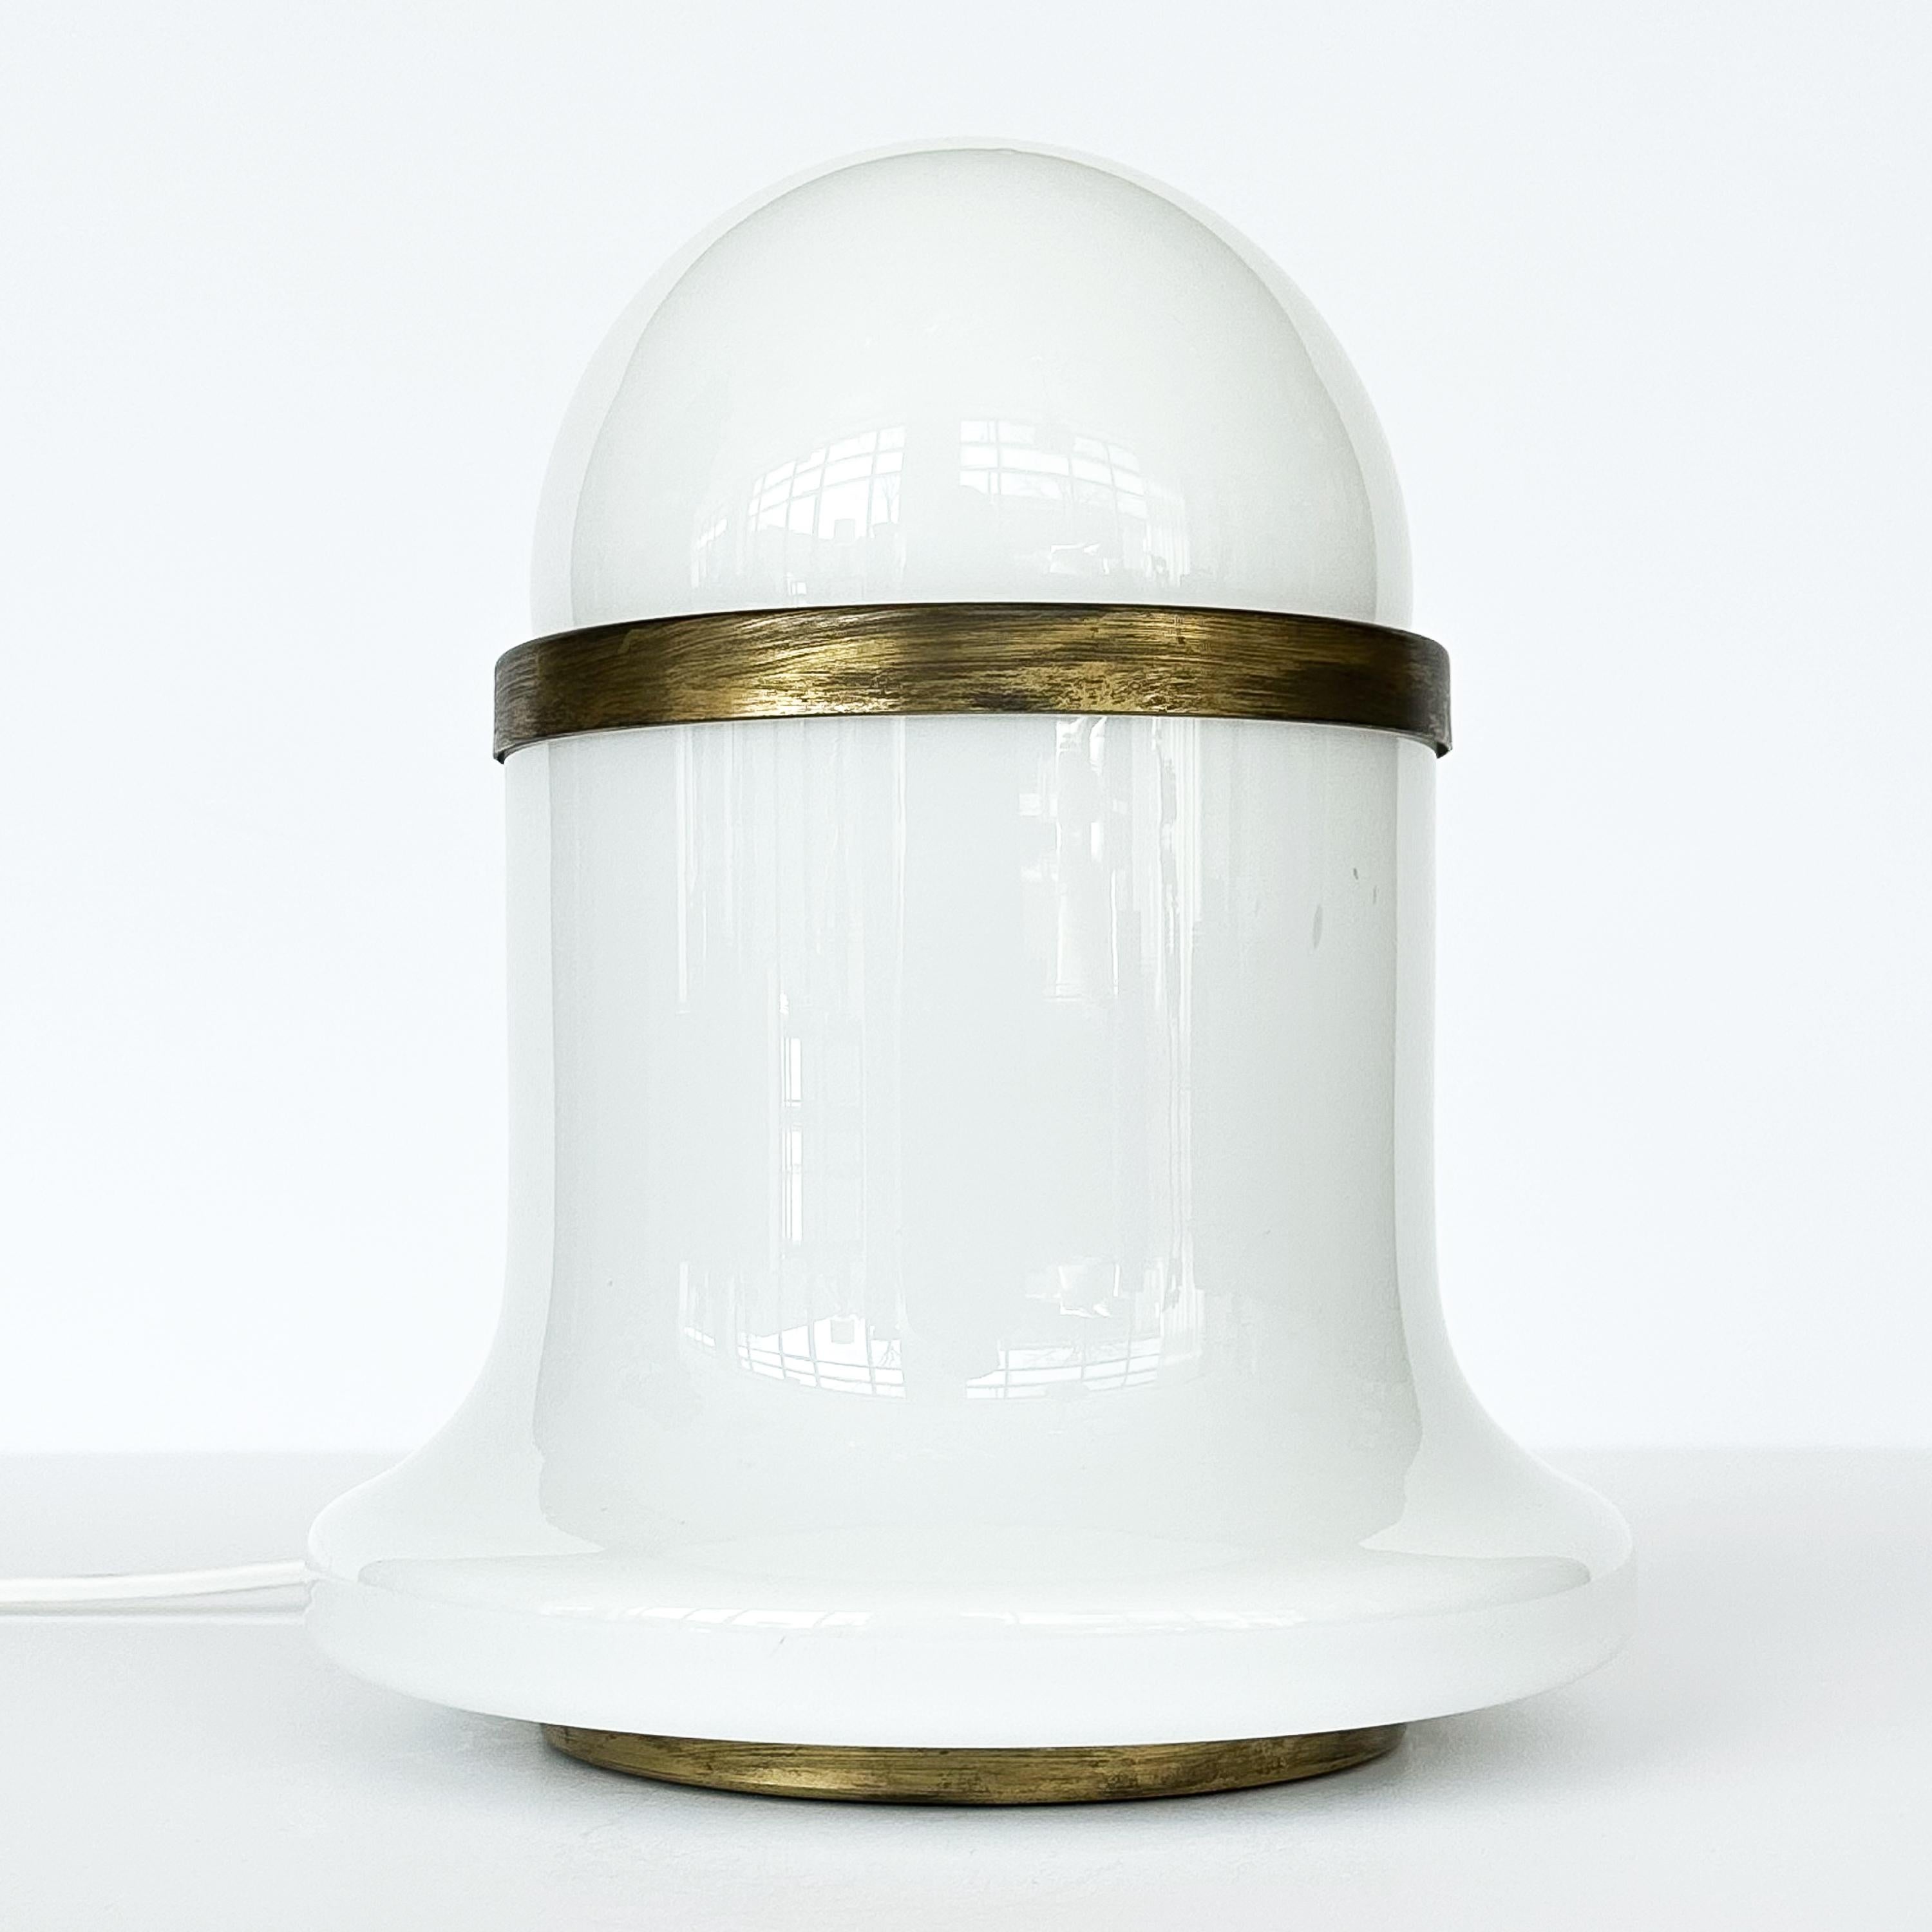 Italian white cased glass and antiqued brass table lamp, circa 1960s, designed by Goffredo Reggiani for Reggiani . This petite lamp serves as an exceptional choice for accent lighting, seamlessly blending form and function. Featuring a sweeping